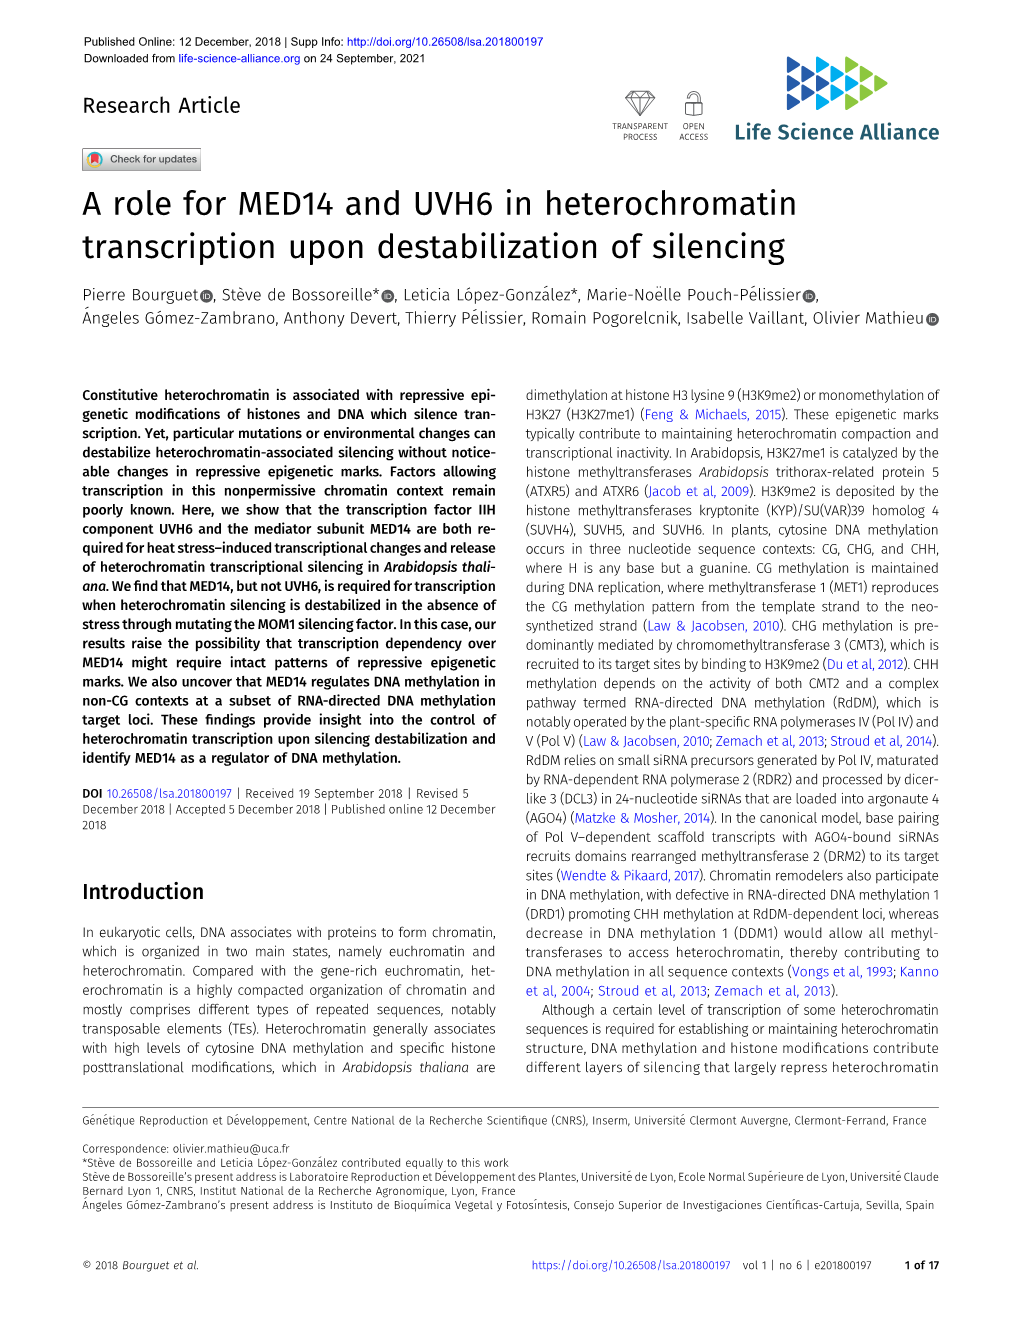 A Role for MED14 and UVH6 in Heterochromatin Transcription Upon Destabilization of Silencing